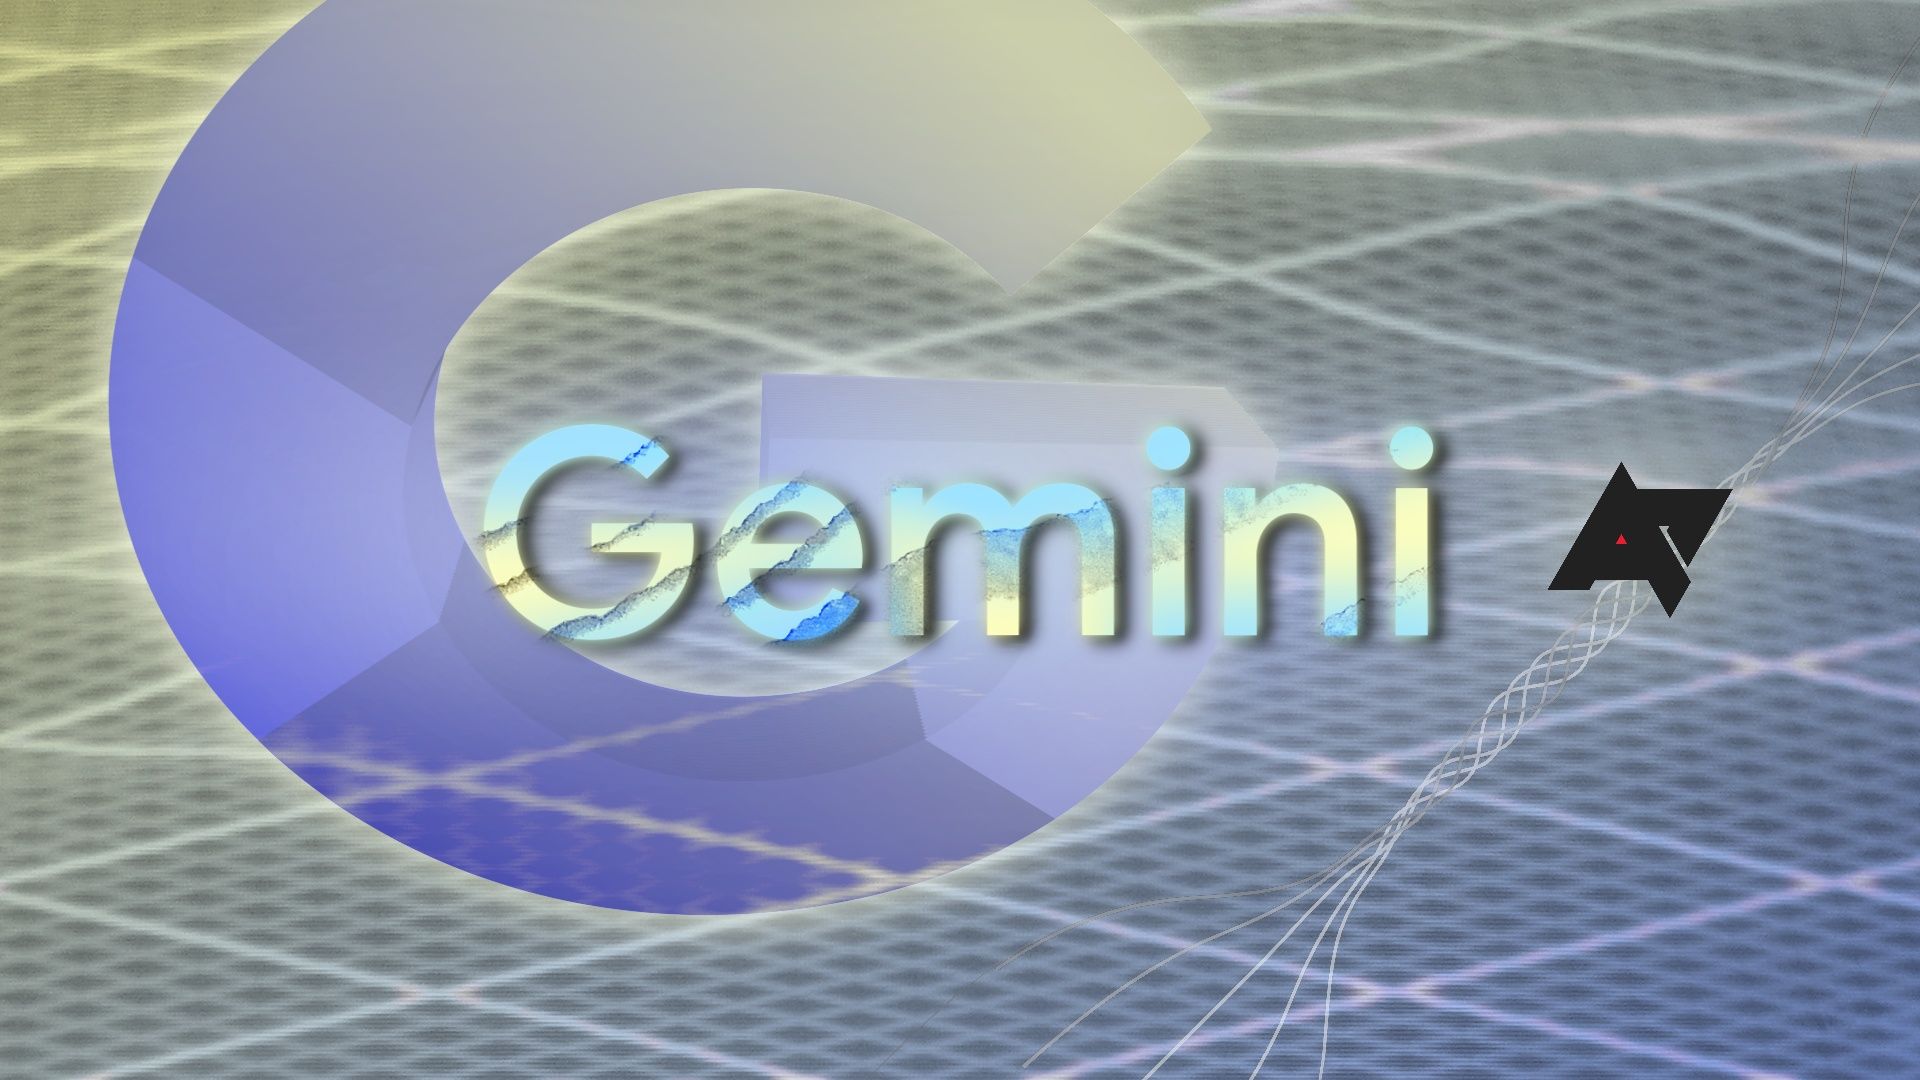 Google's Gemini logo on a background with the Google G logo